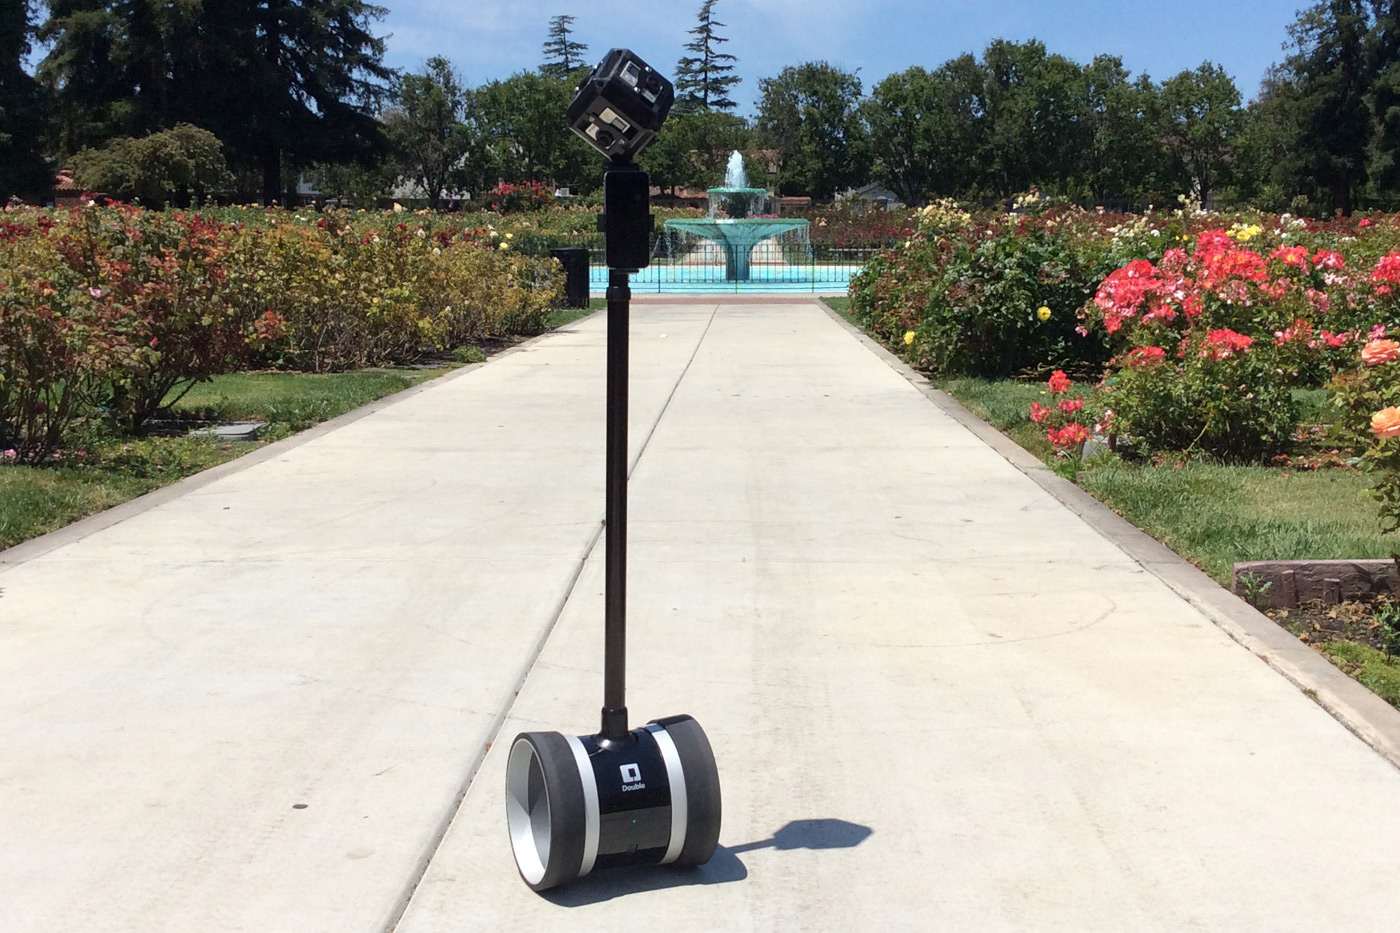 Double Robotics turns its telepresence robot into a VR rig